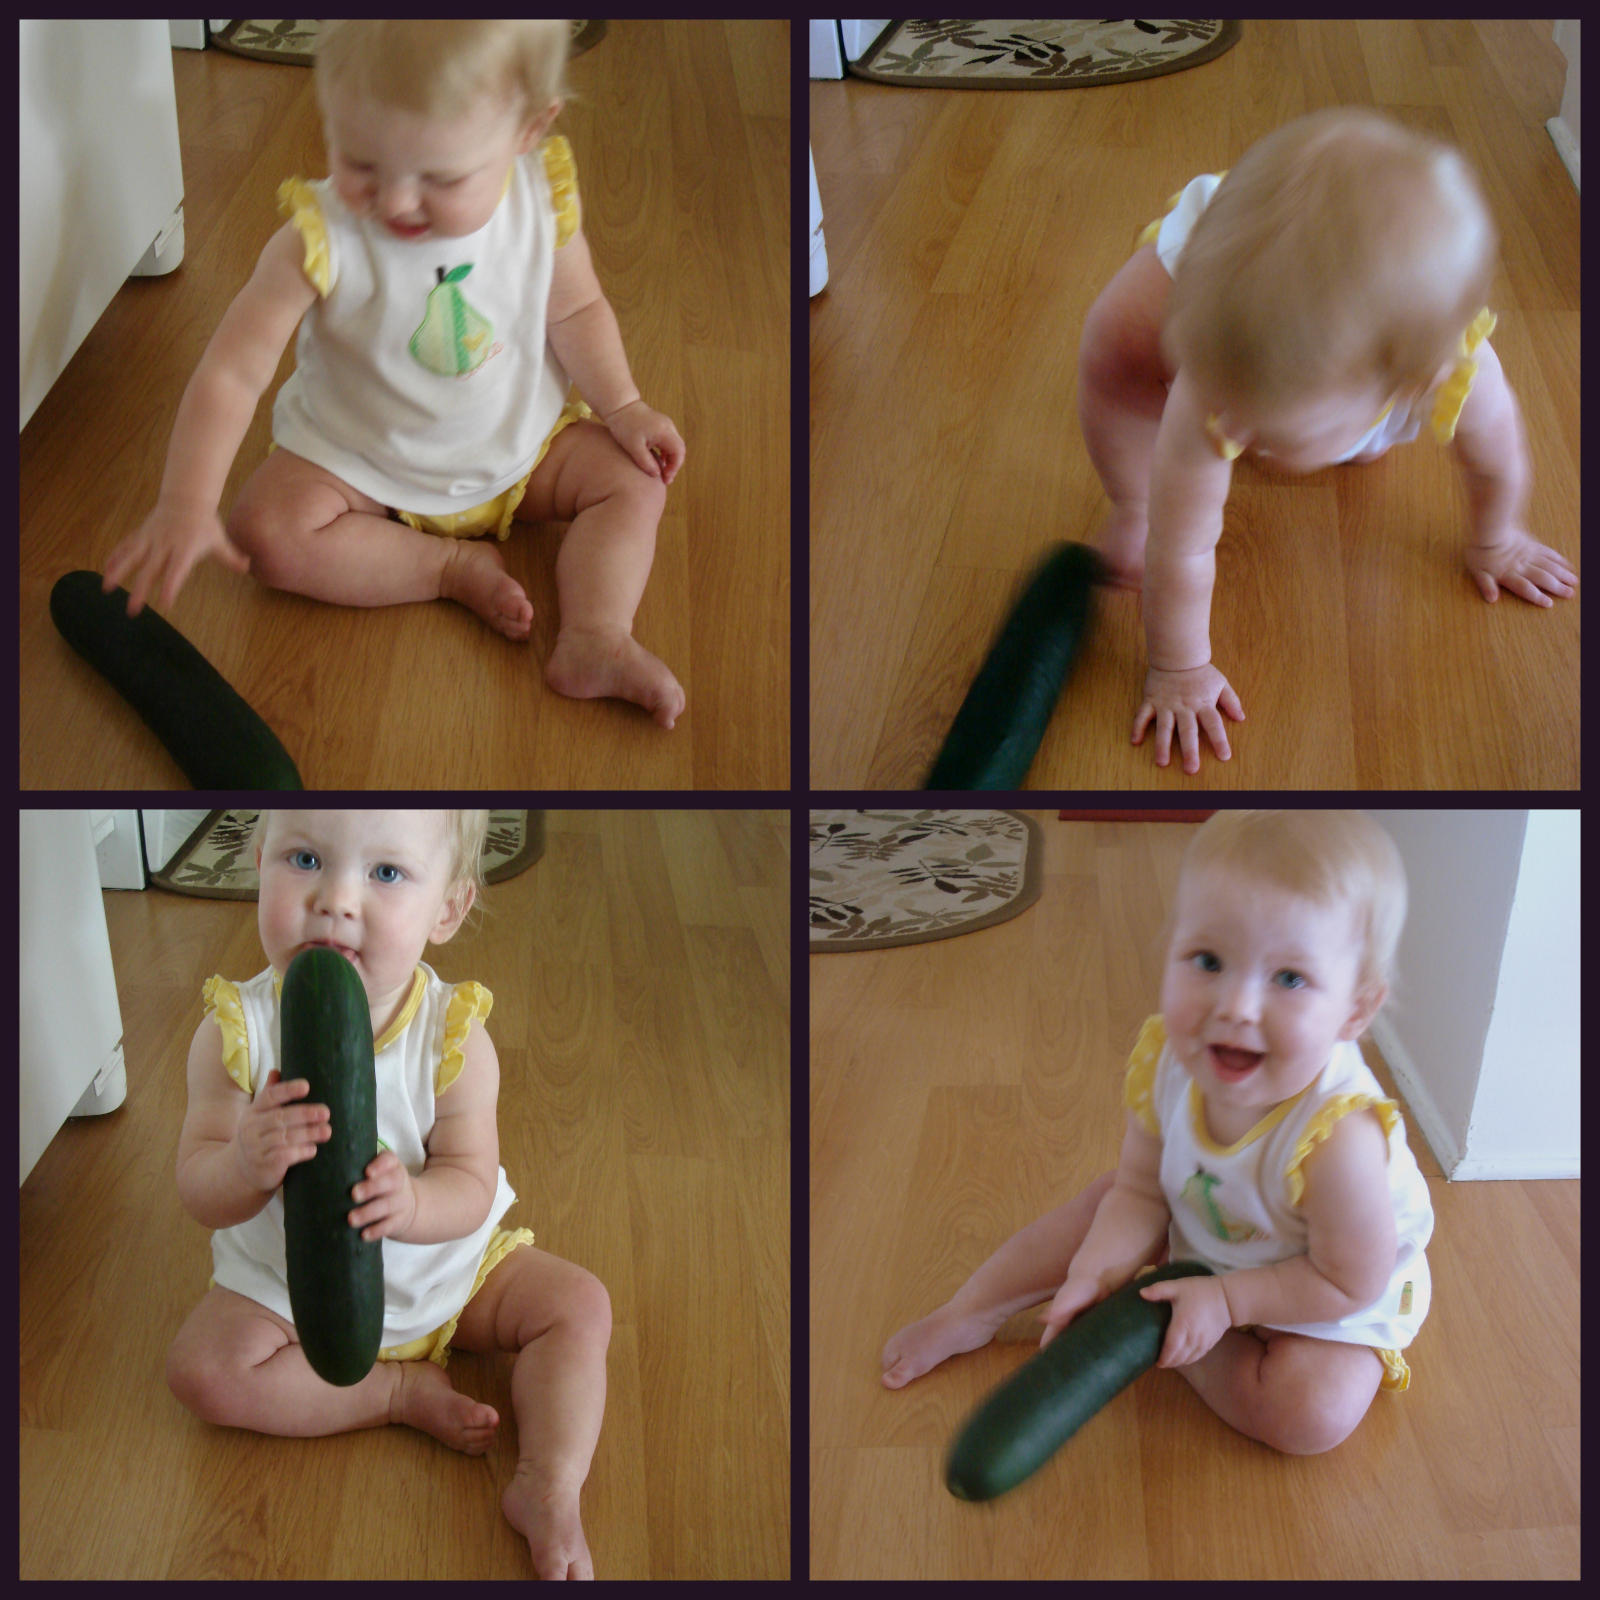 Emily and her cucumber